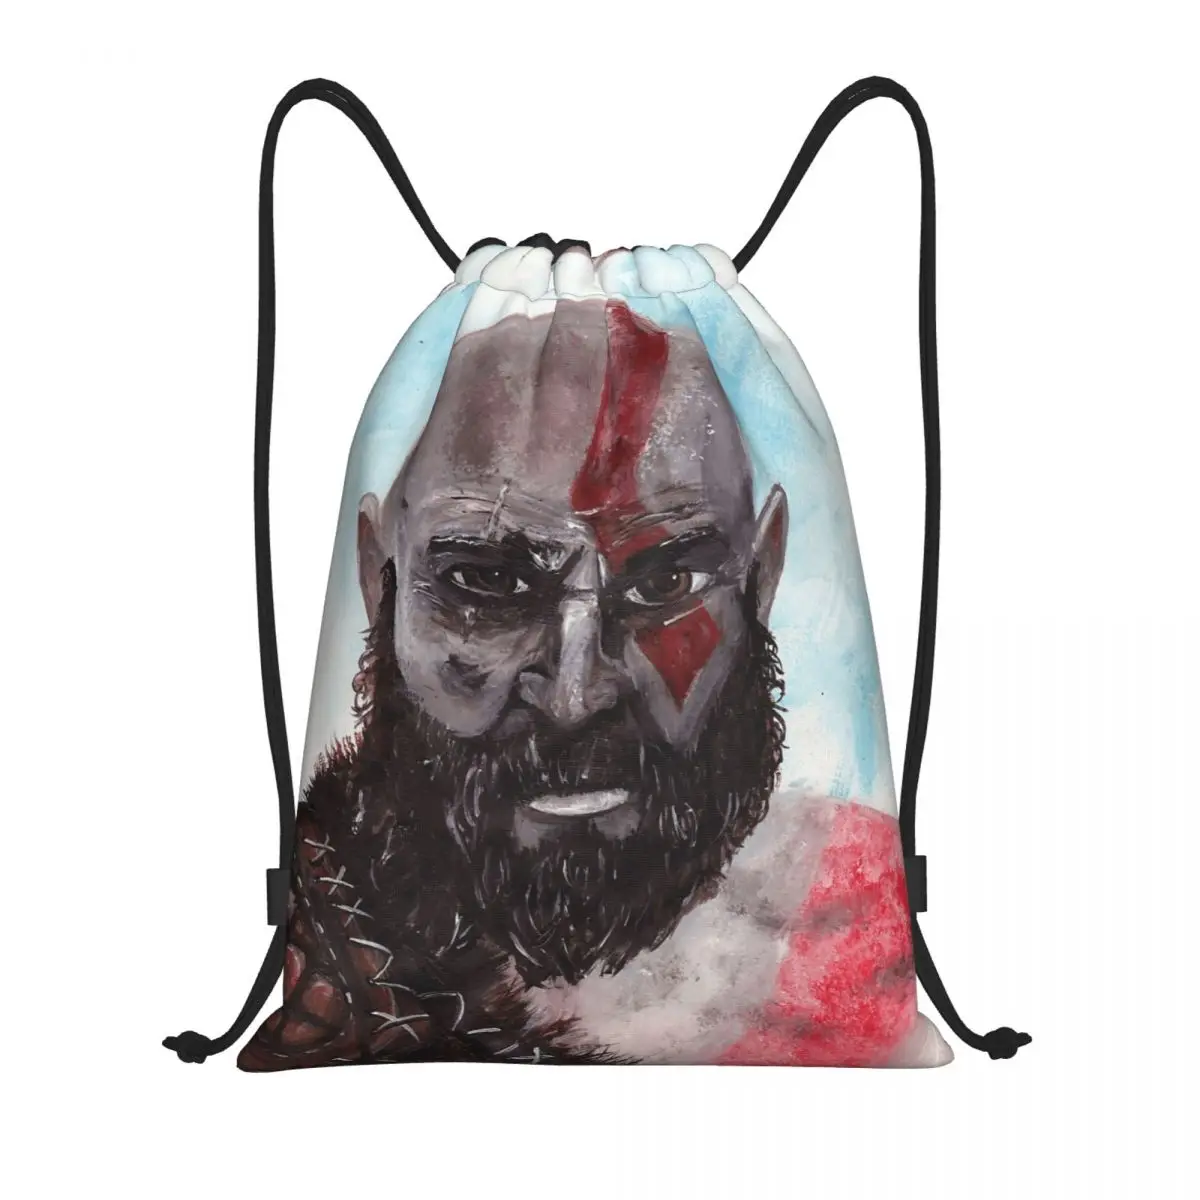 

Kratos Sparta 12 Funny Graphic Drawstring Bags Gym Bag Infantry pack Cosy Backpack Humor Graphic